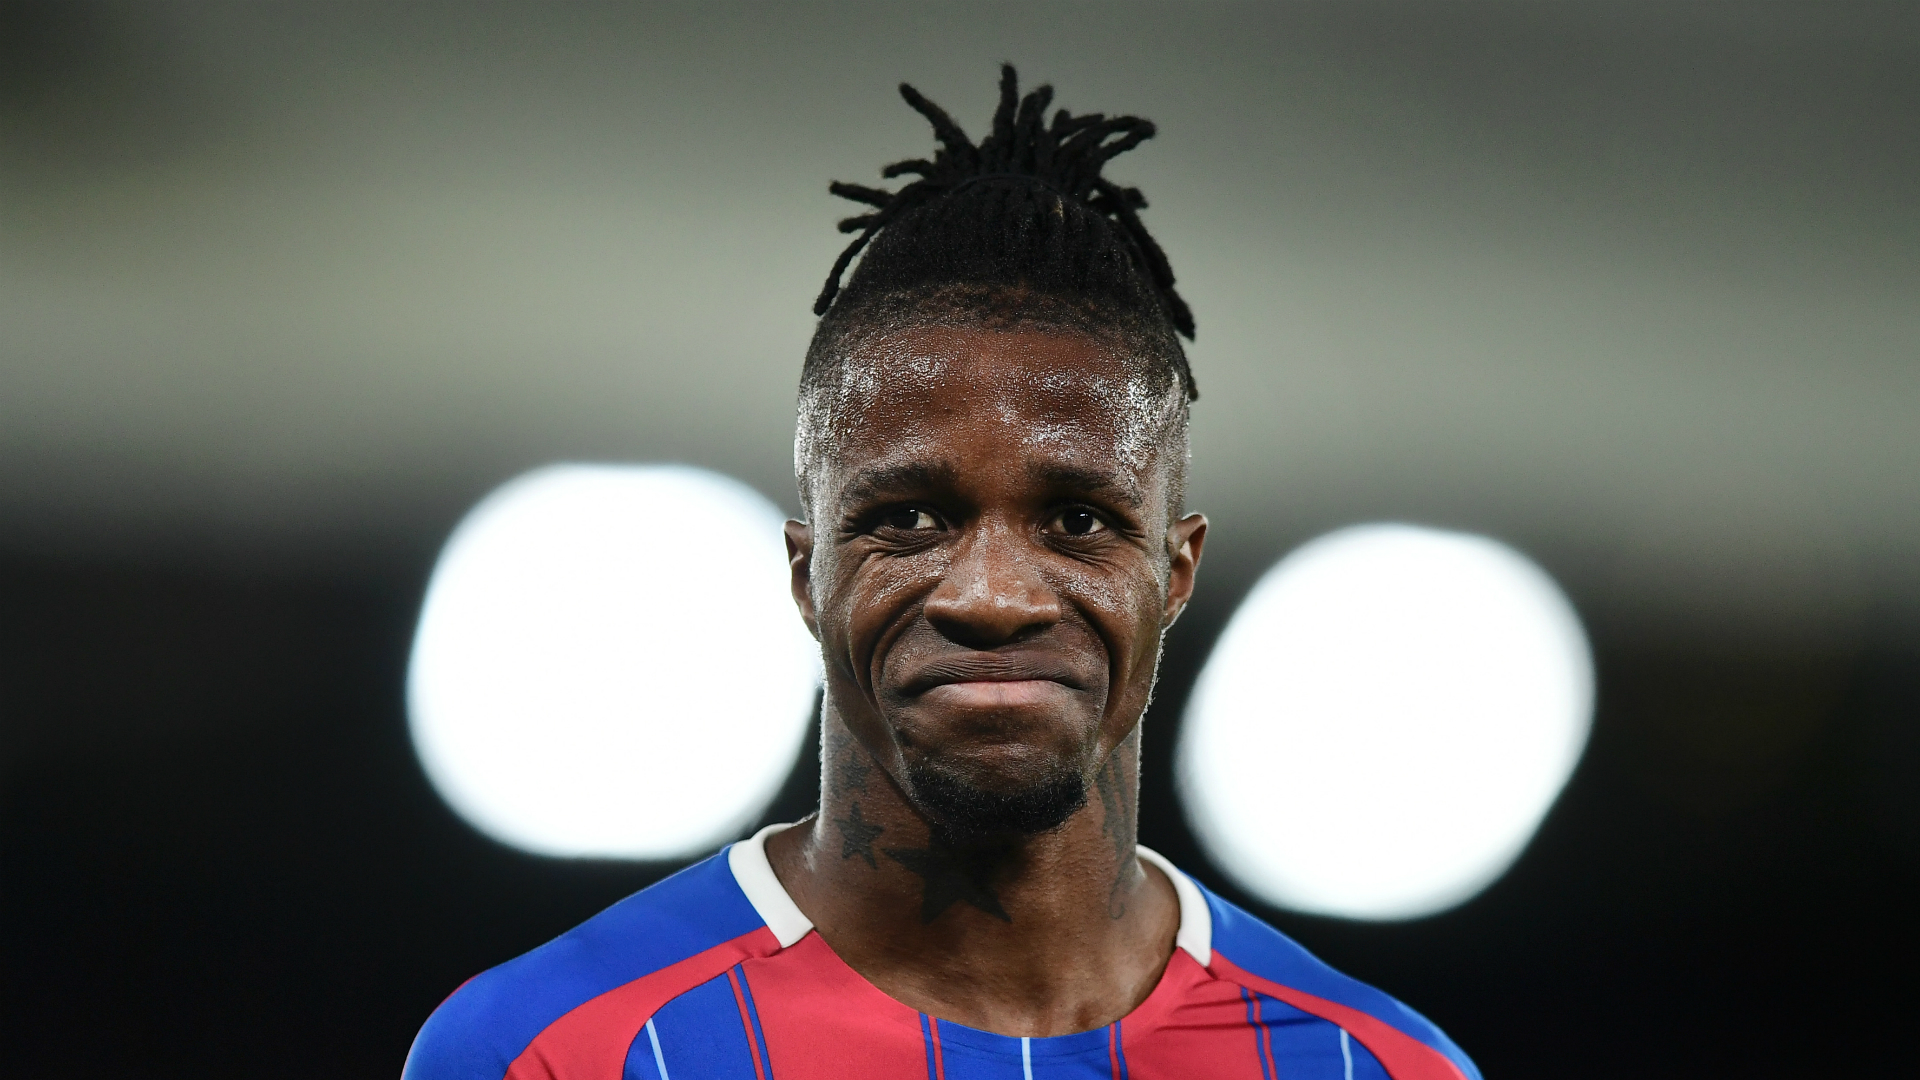 Rumours continue to link Wilfried Zaha with a Crystal Palace exit but he downplayed his involvement in a viral Instagram video.